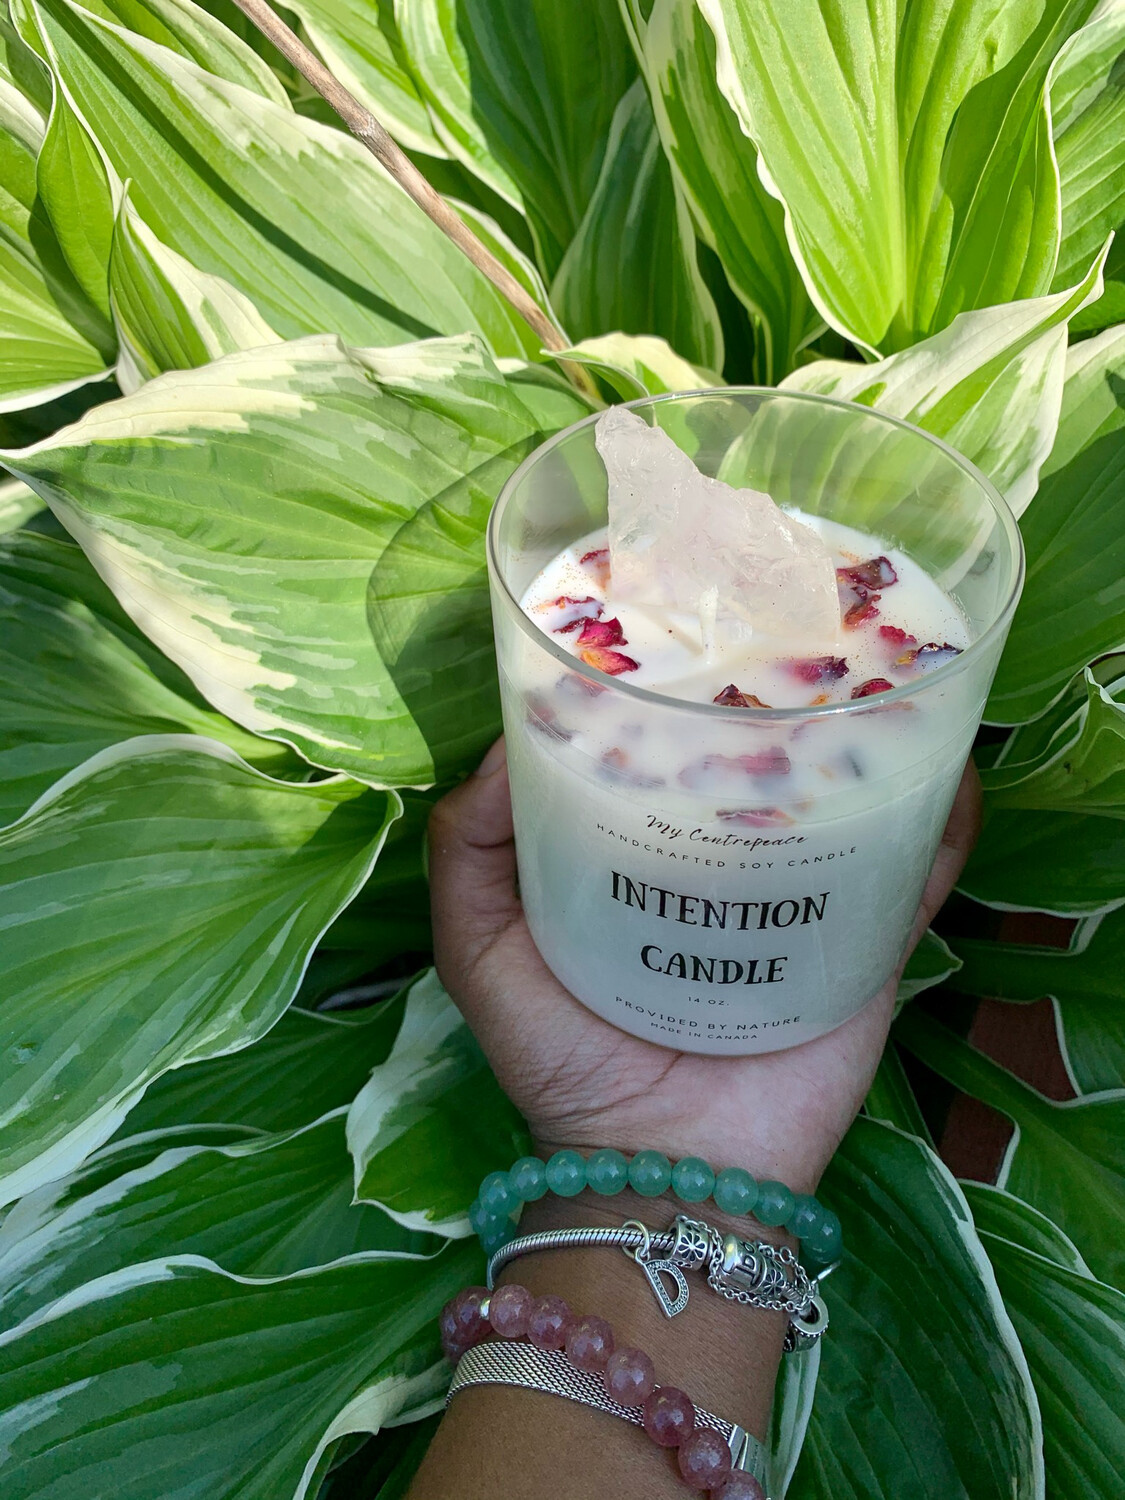 Intention candle